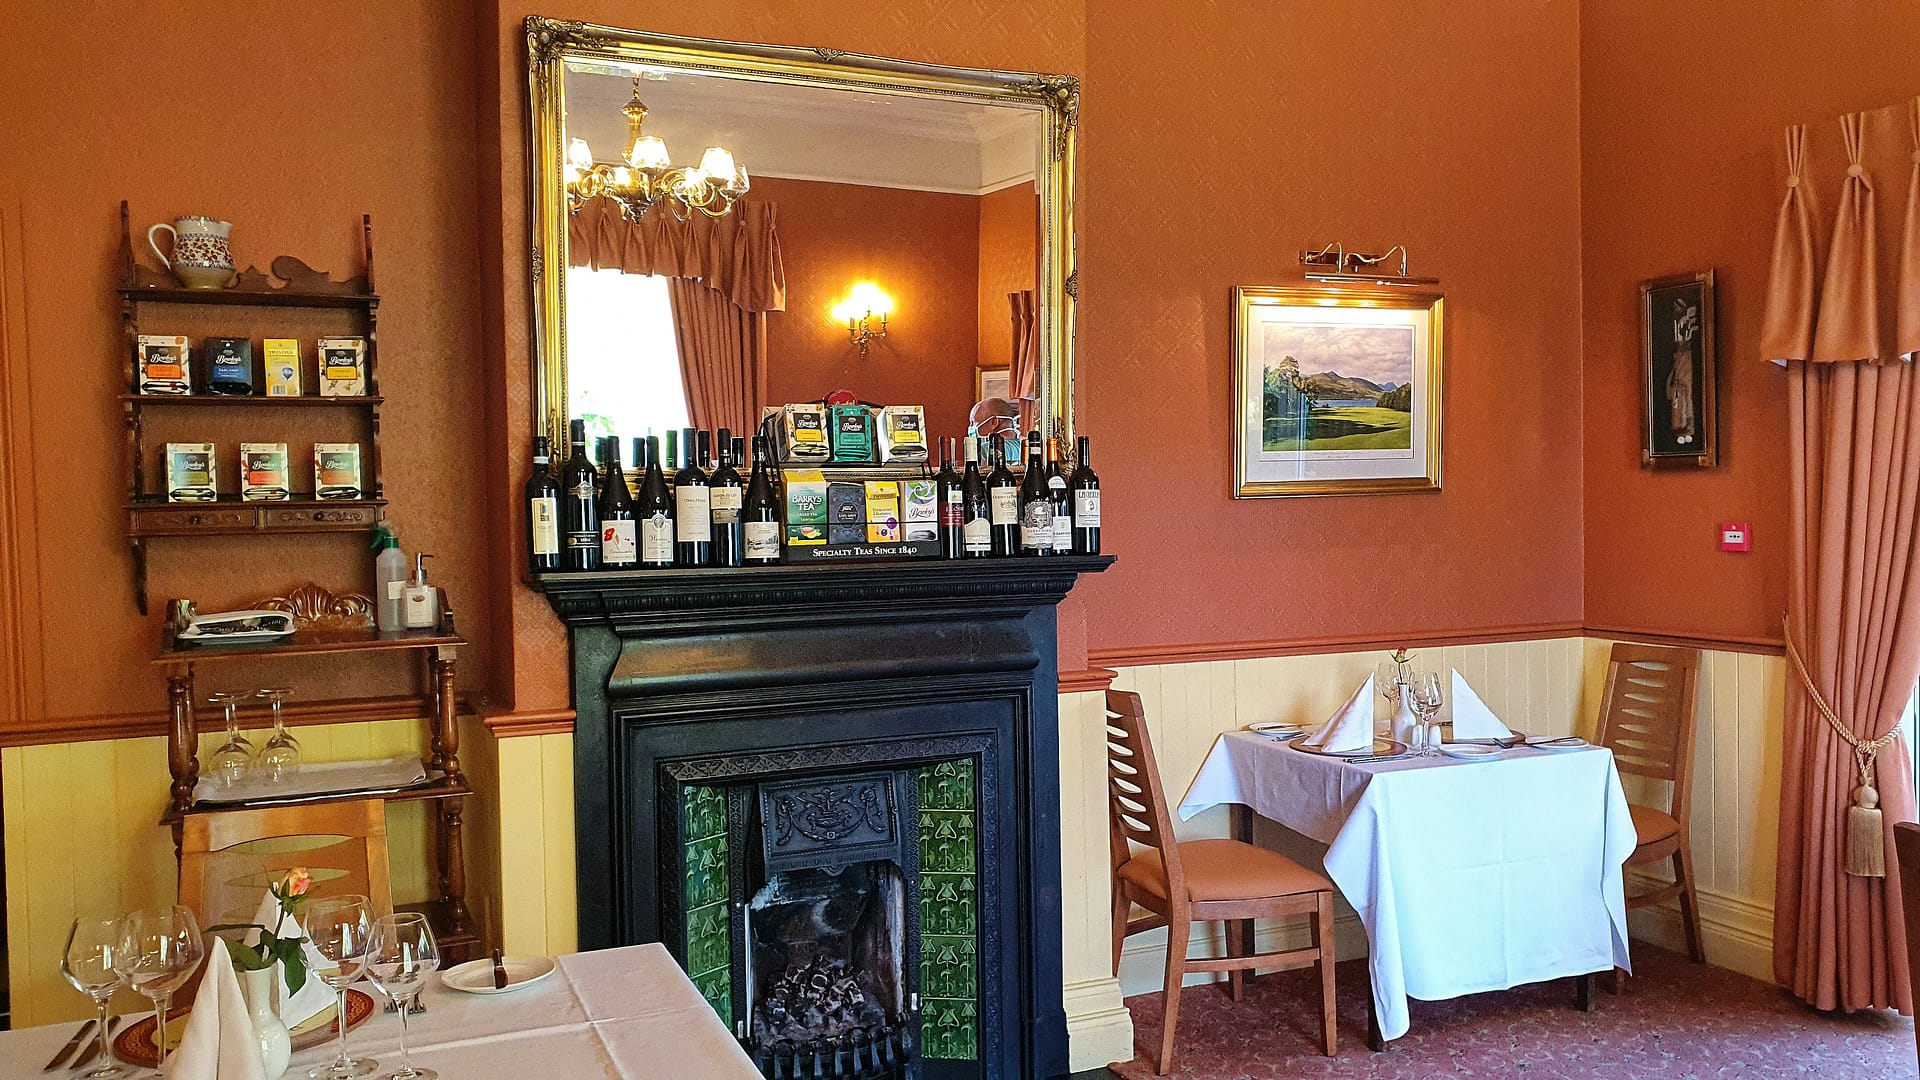 A picture of the lovely fireplace in Rozzers Restaurant